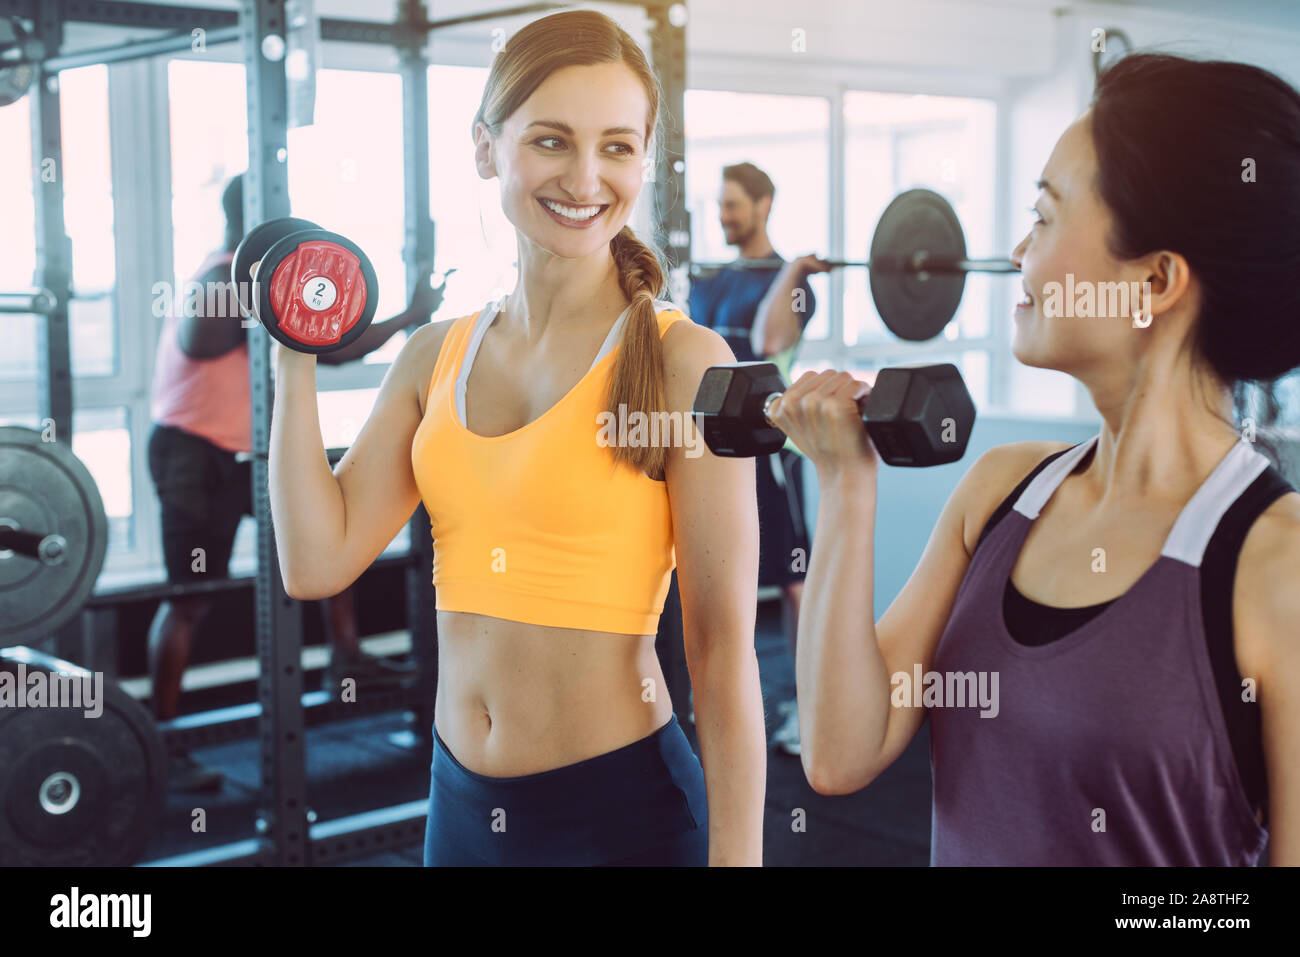 Two women doing fitness training together in the gym Stock Photo